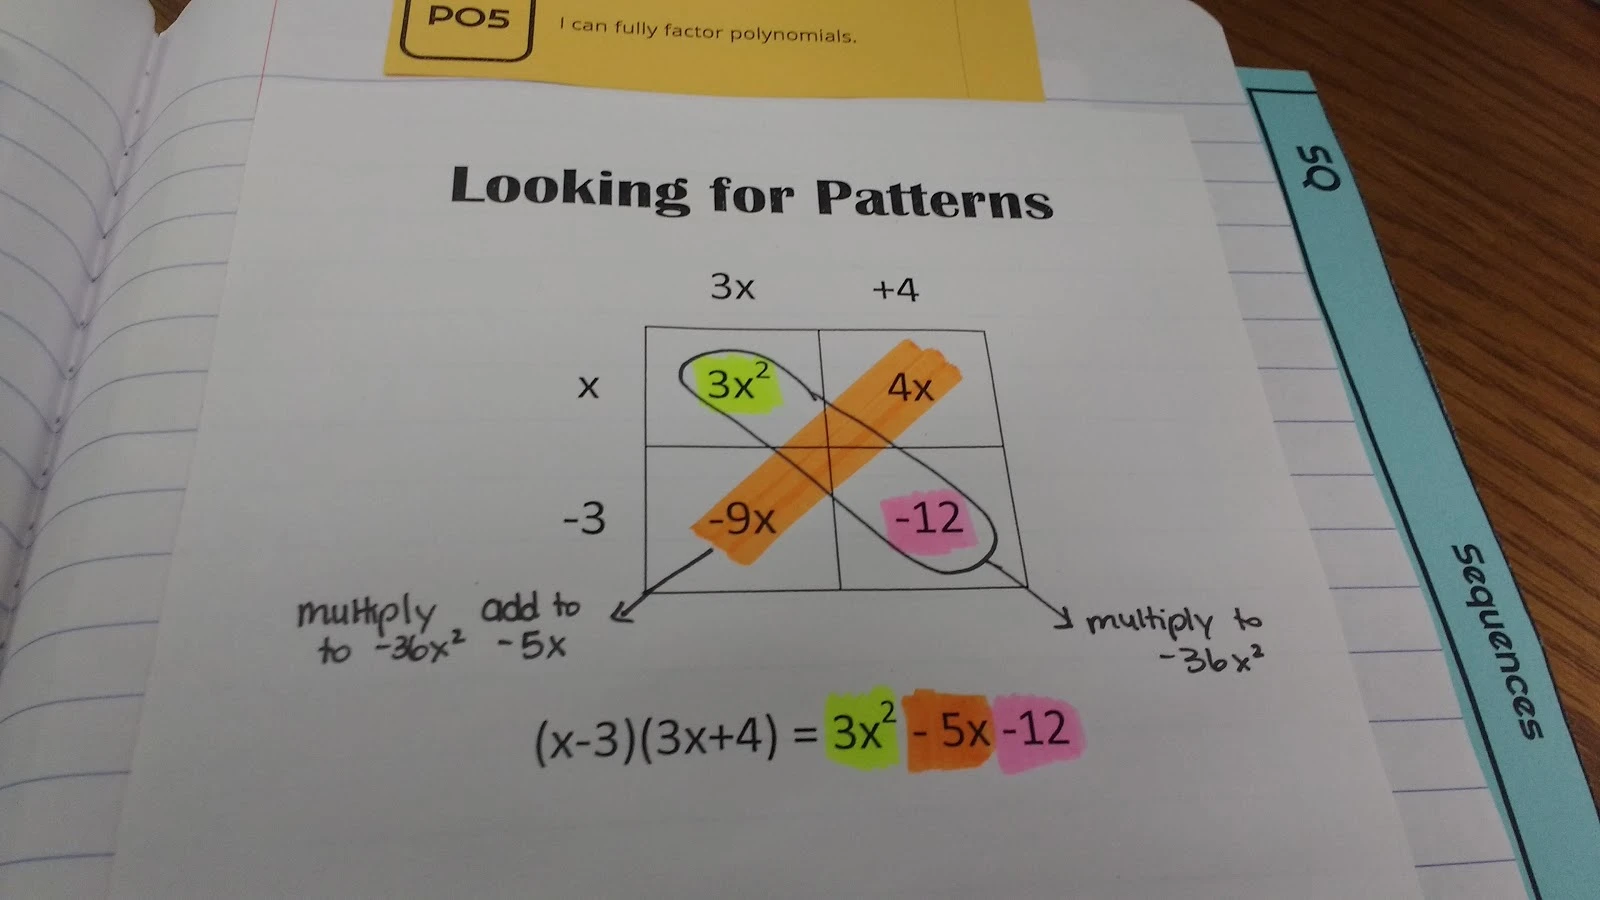 Looking for Patterns in Factoring Quadratics Notes. 